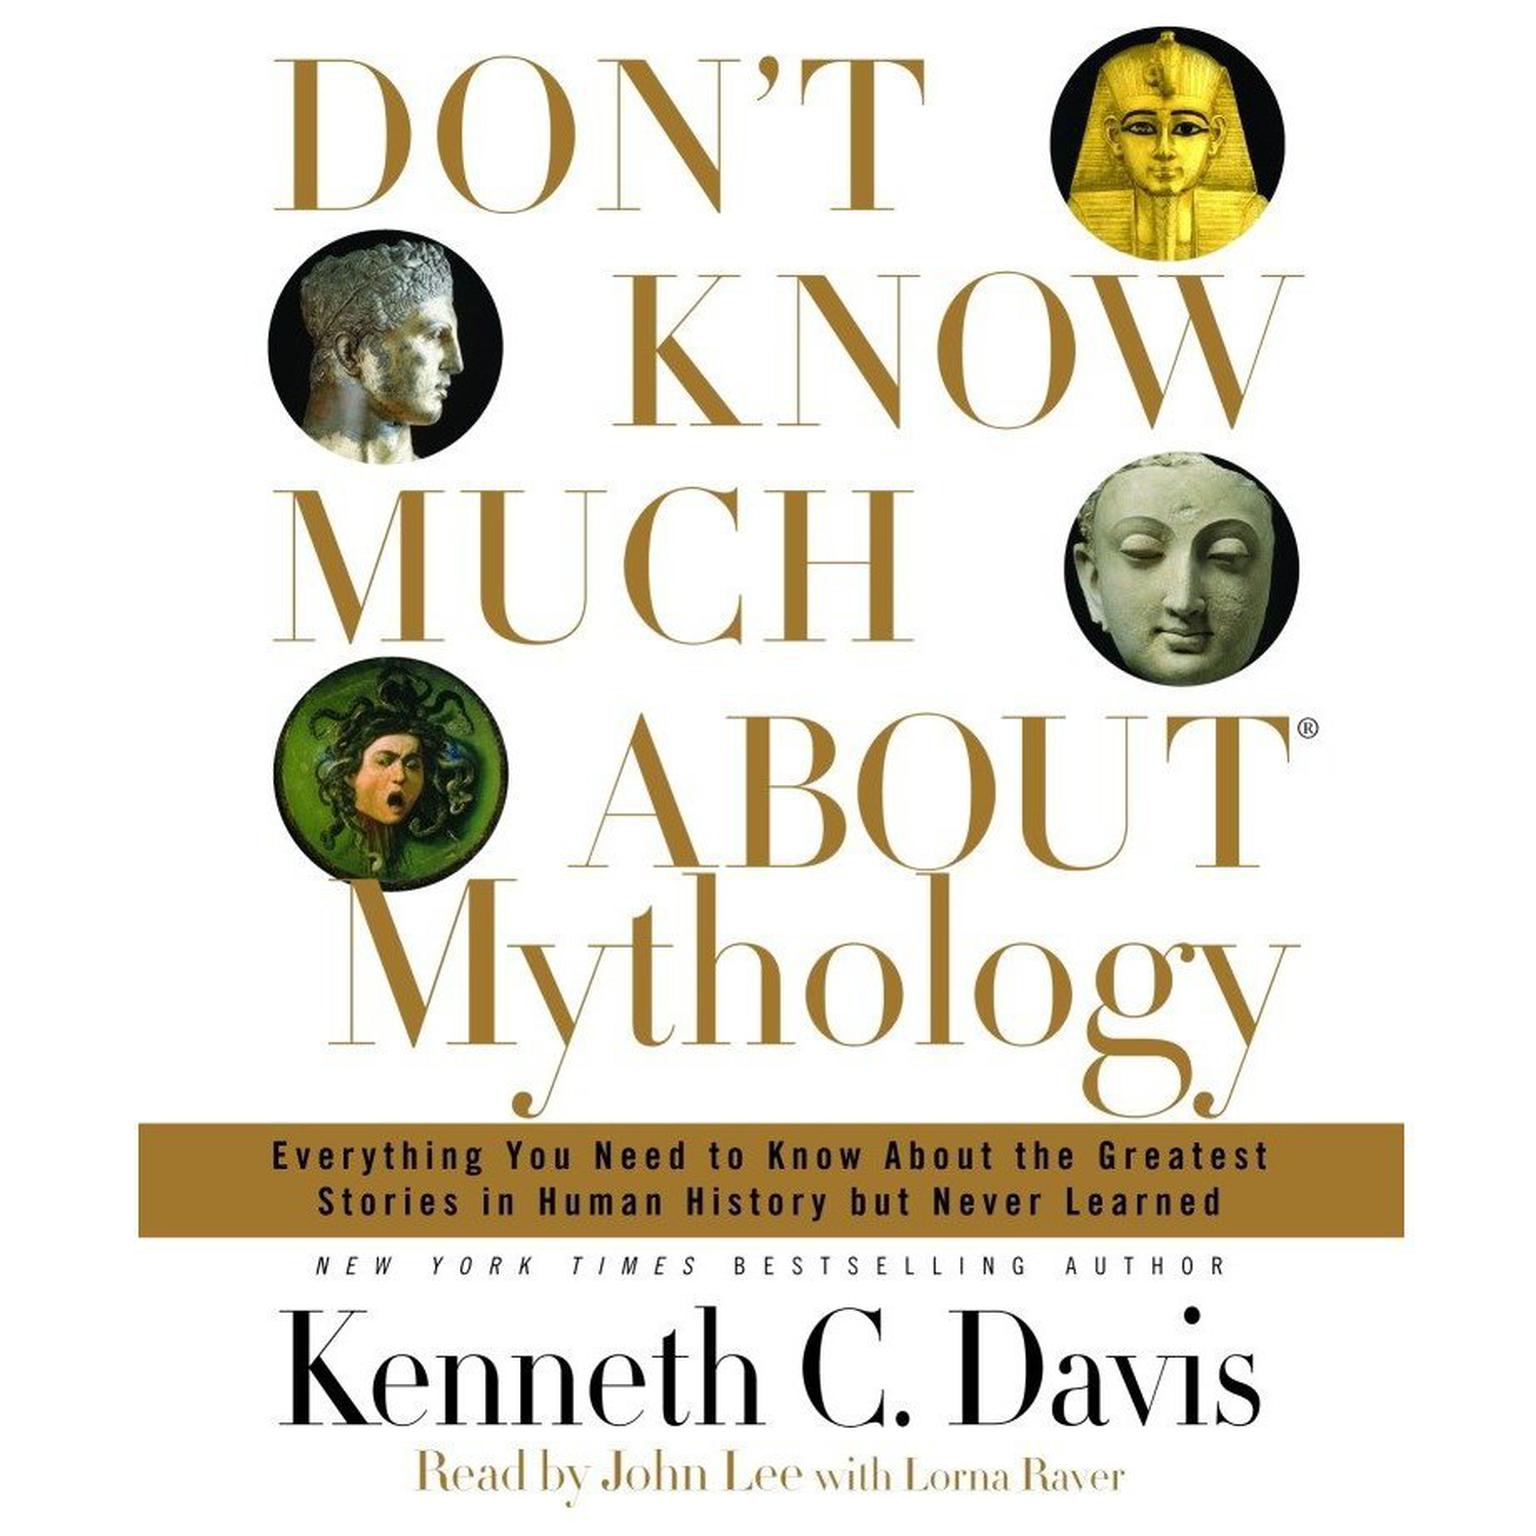 Dont Know Much About Mythology (Abridged): Everything You Need to Know About the Greatest Stories in Human History but Never Learned Audiobook, by Kenneth C. Davis